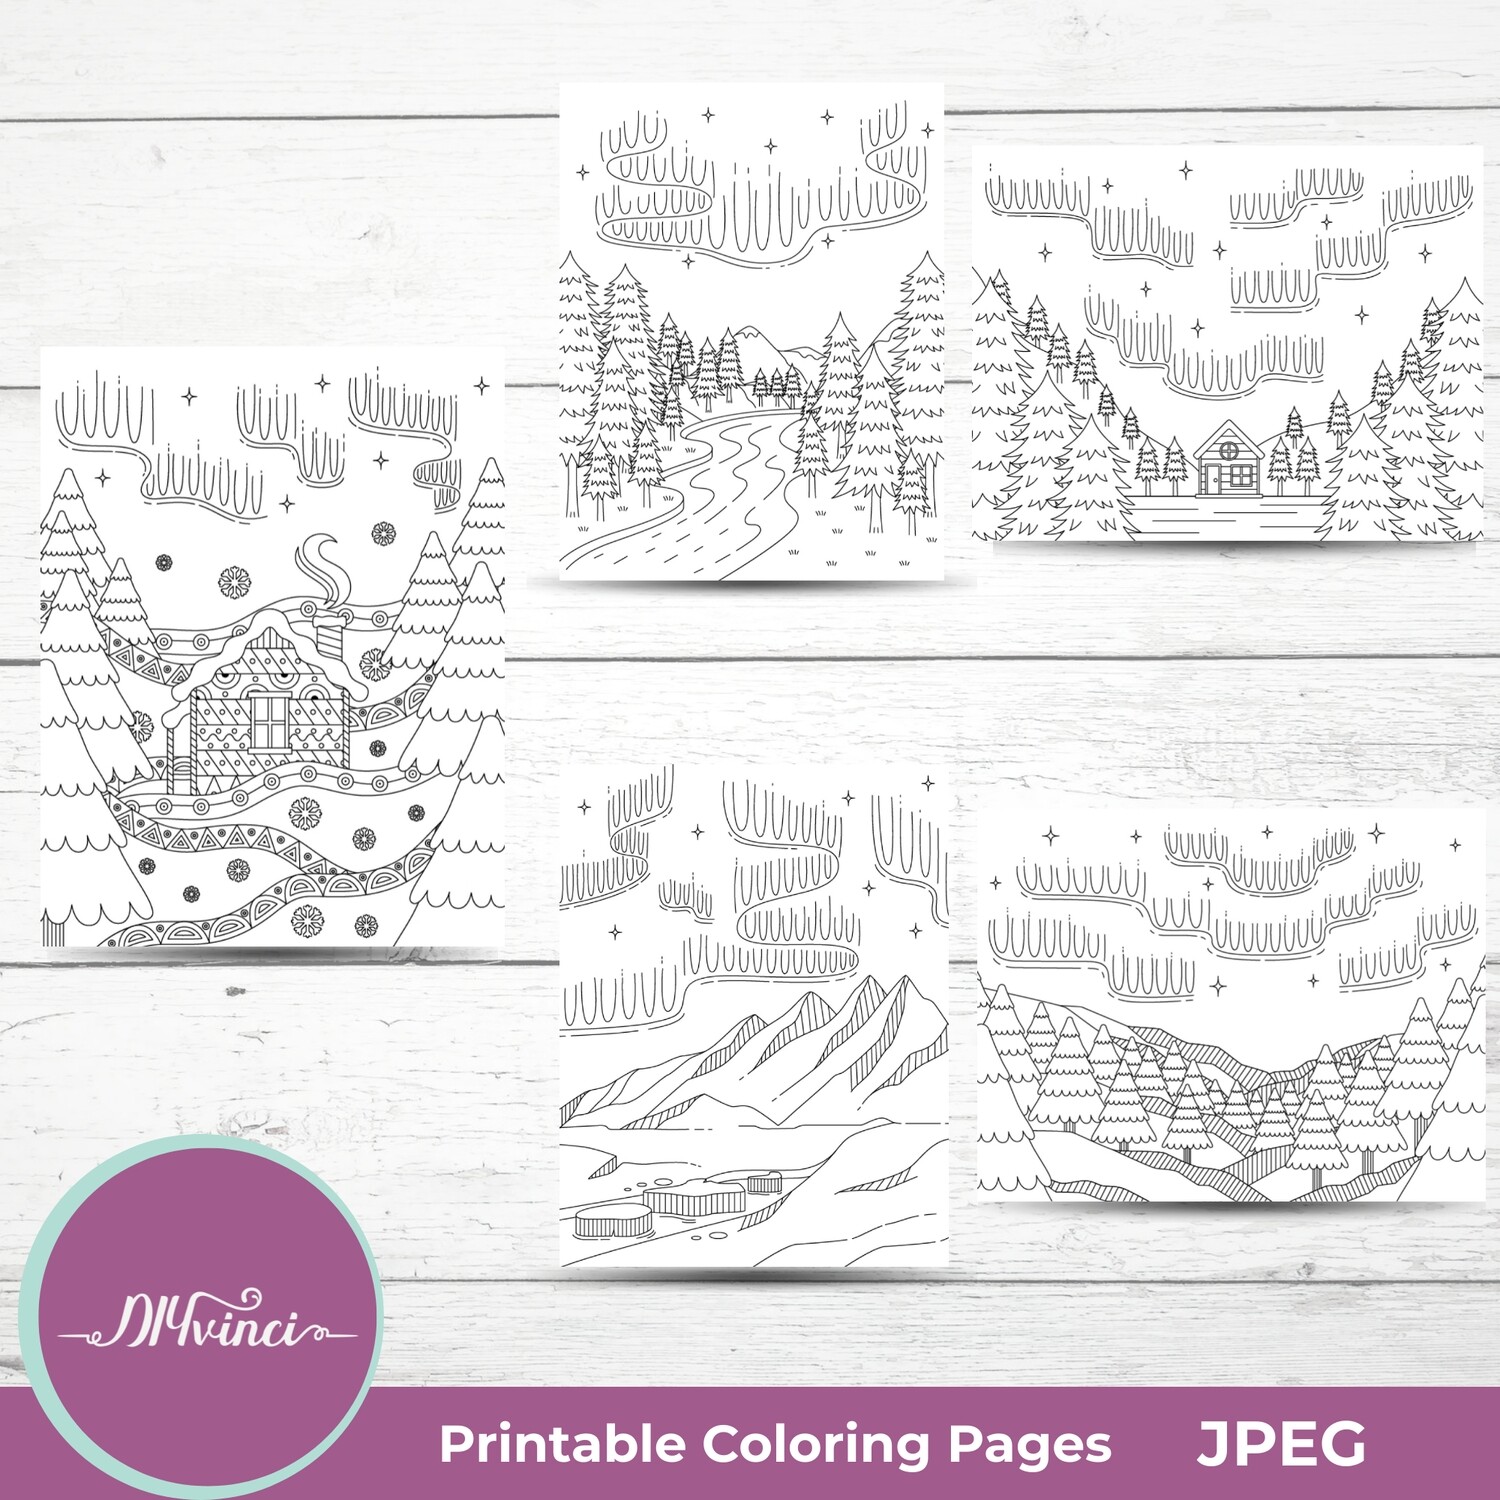 5 Northern Lights Printable Coloring Pages - JPEG - Personal and Commercial Use